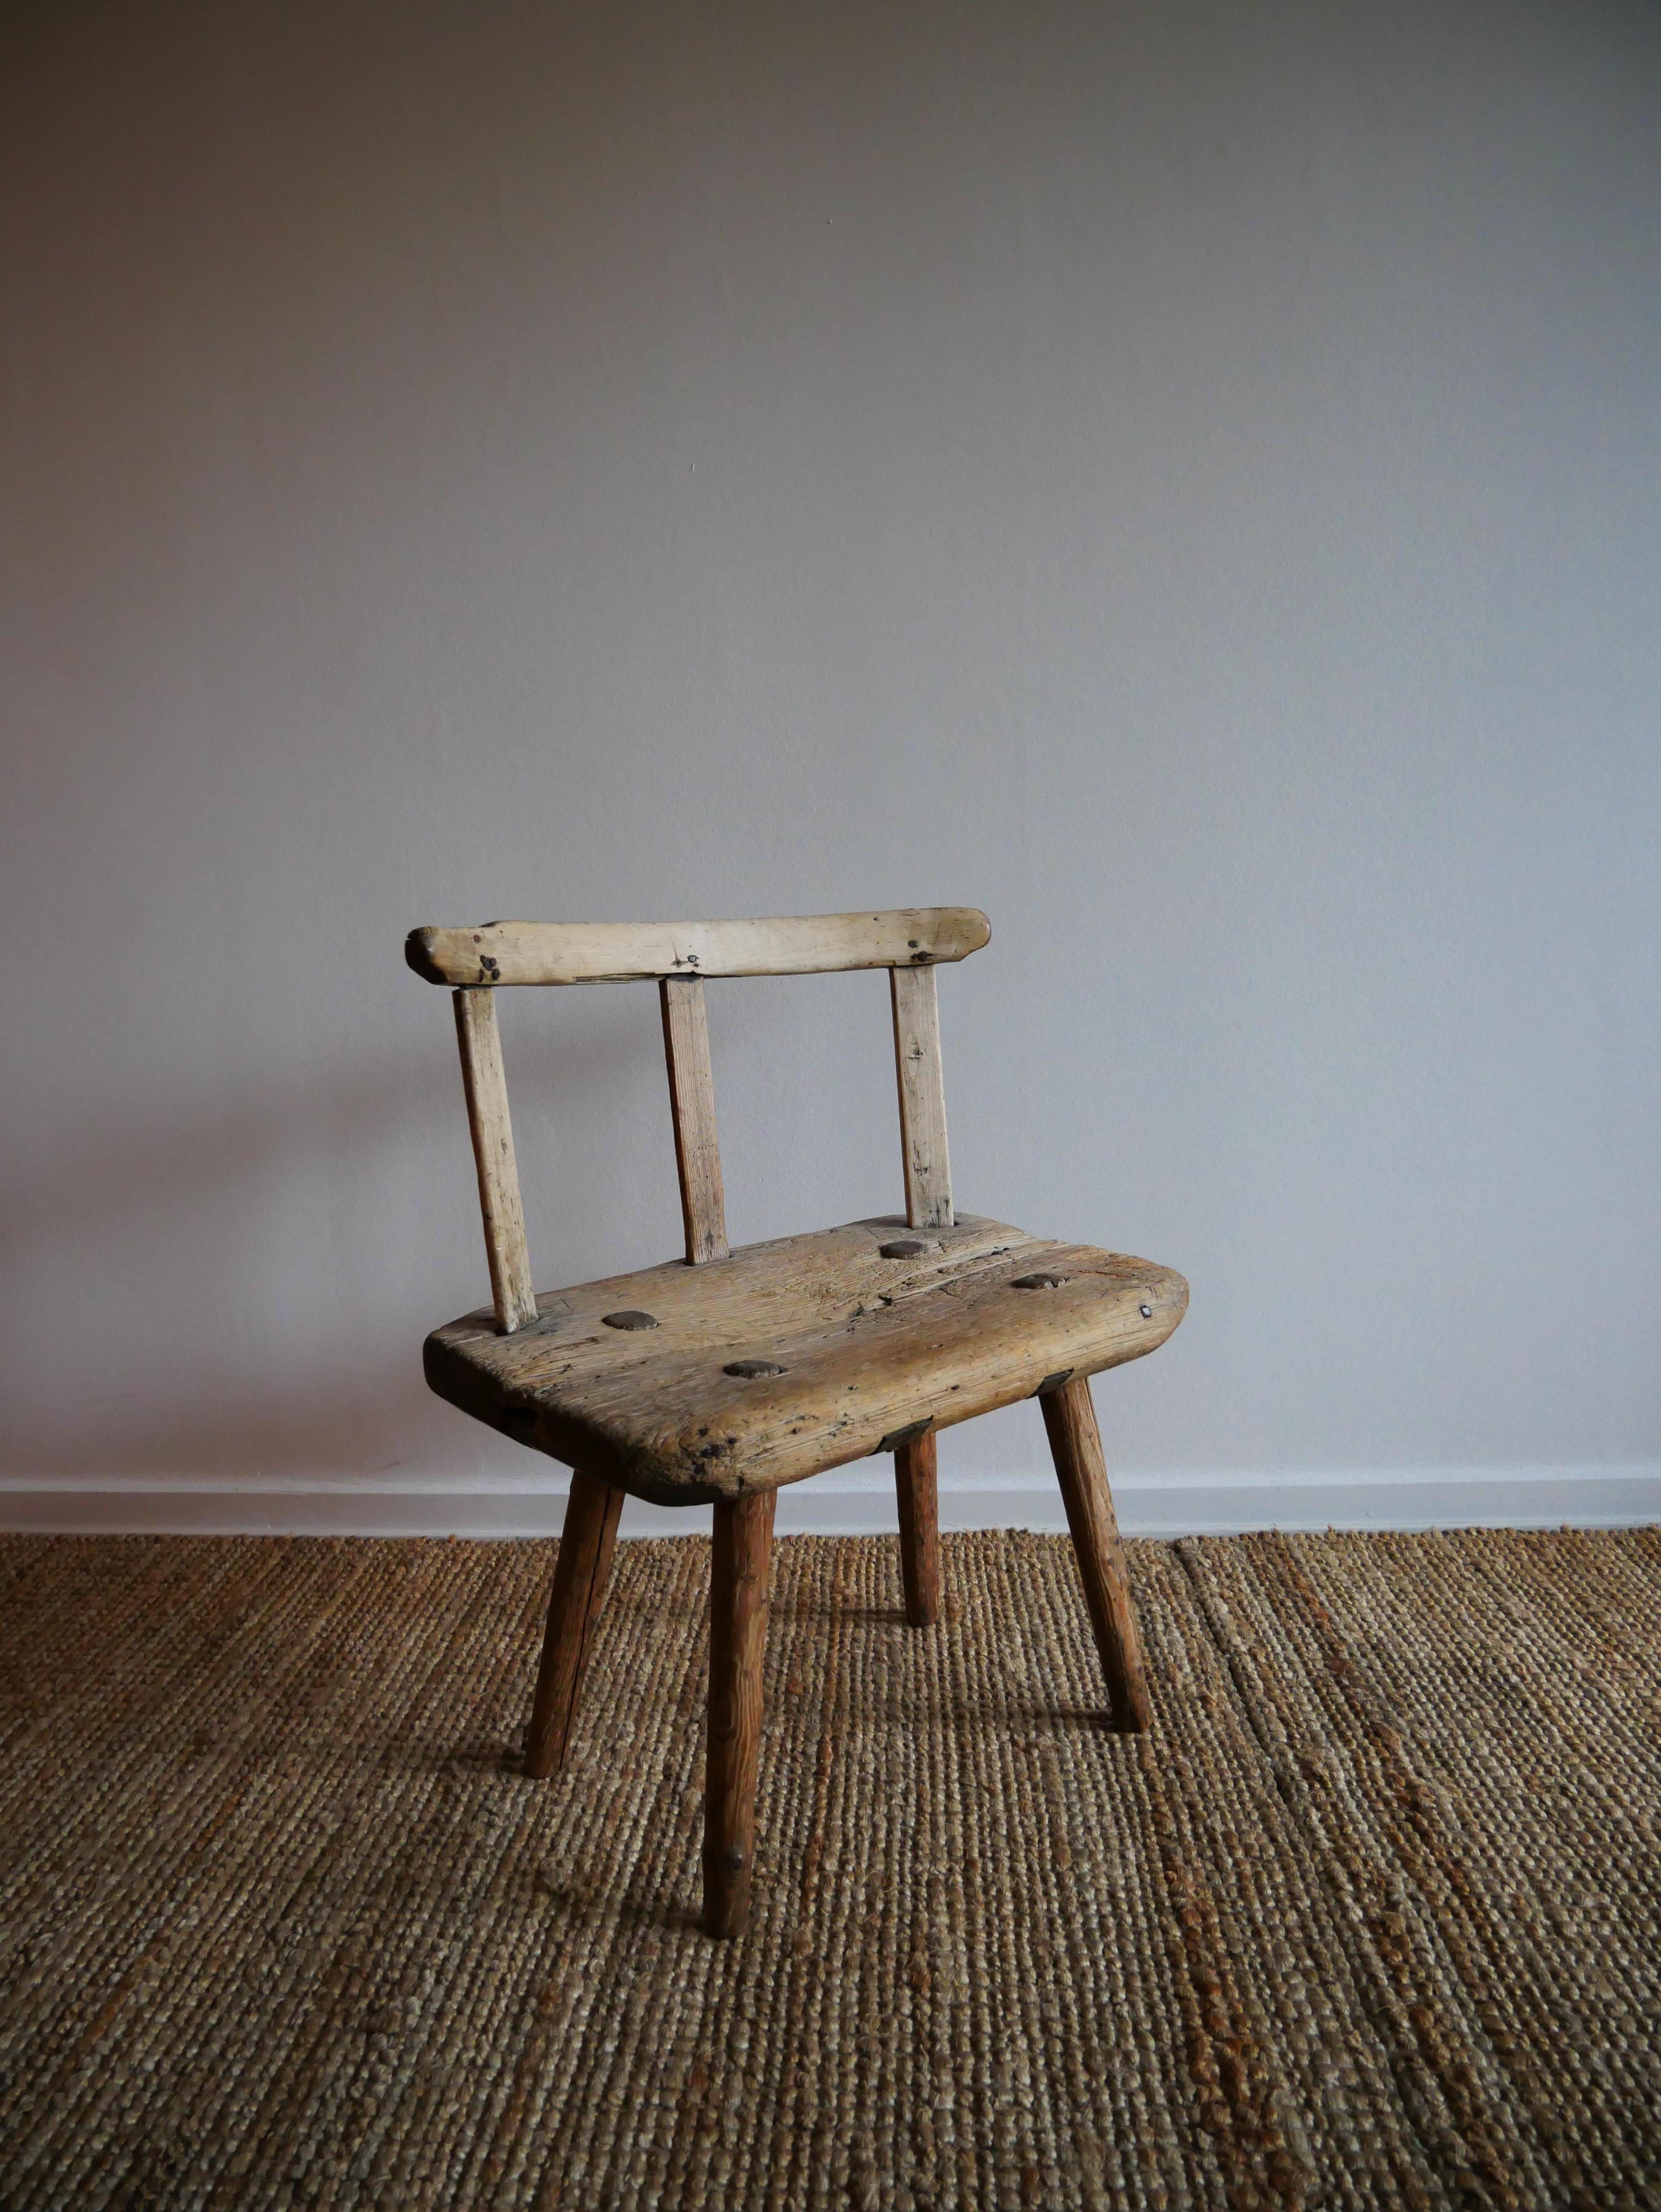 Fäbostol, Älvdalen, Dalarna, Sweden

So rare to find these days,
a beautiful solid milking stool with great patina and with the marks of time

From the beginning of the 1800-century


Height: 59 cm
Depth: 28 cm
Width: 48 cm
Seat height: 34 cm